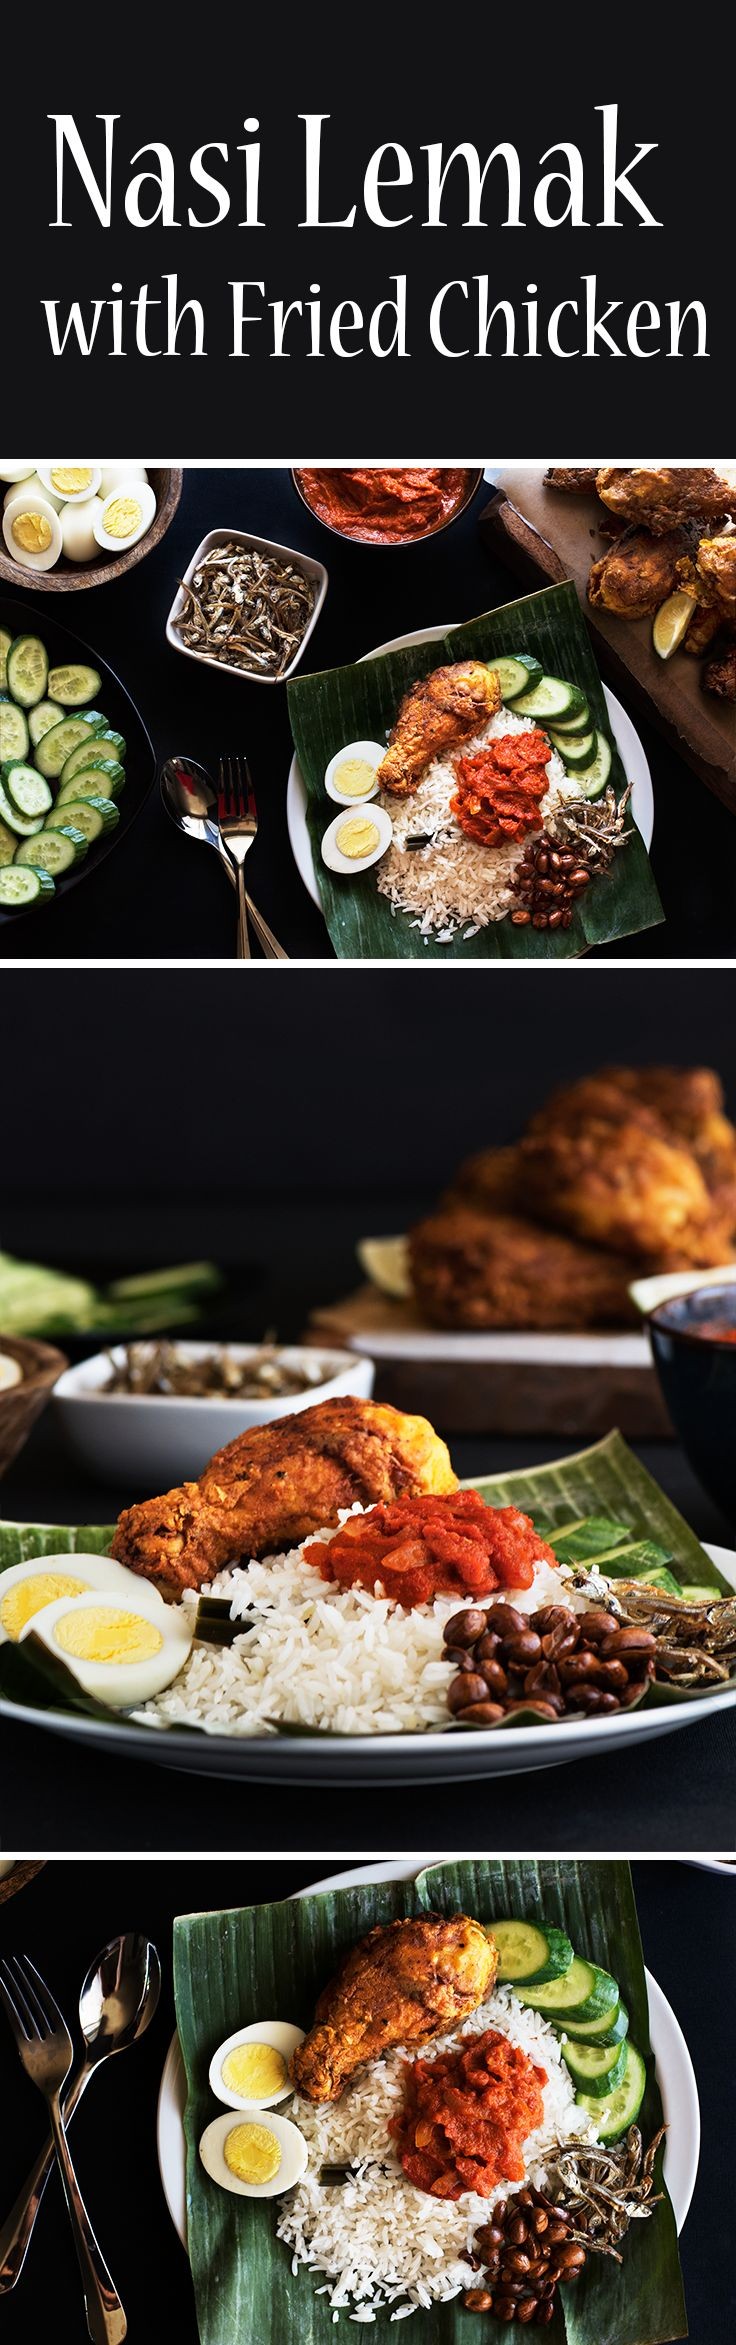 Fragrant coconut rice with sambal (a spicy sauce),...